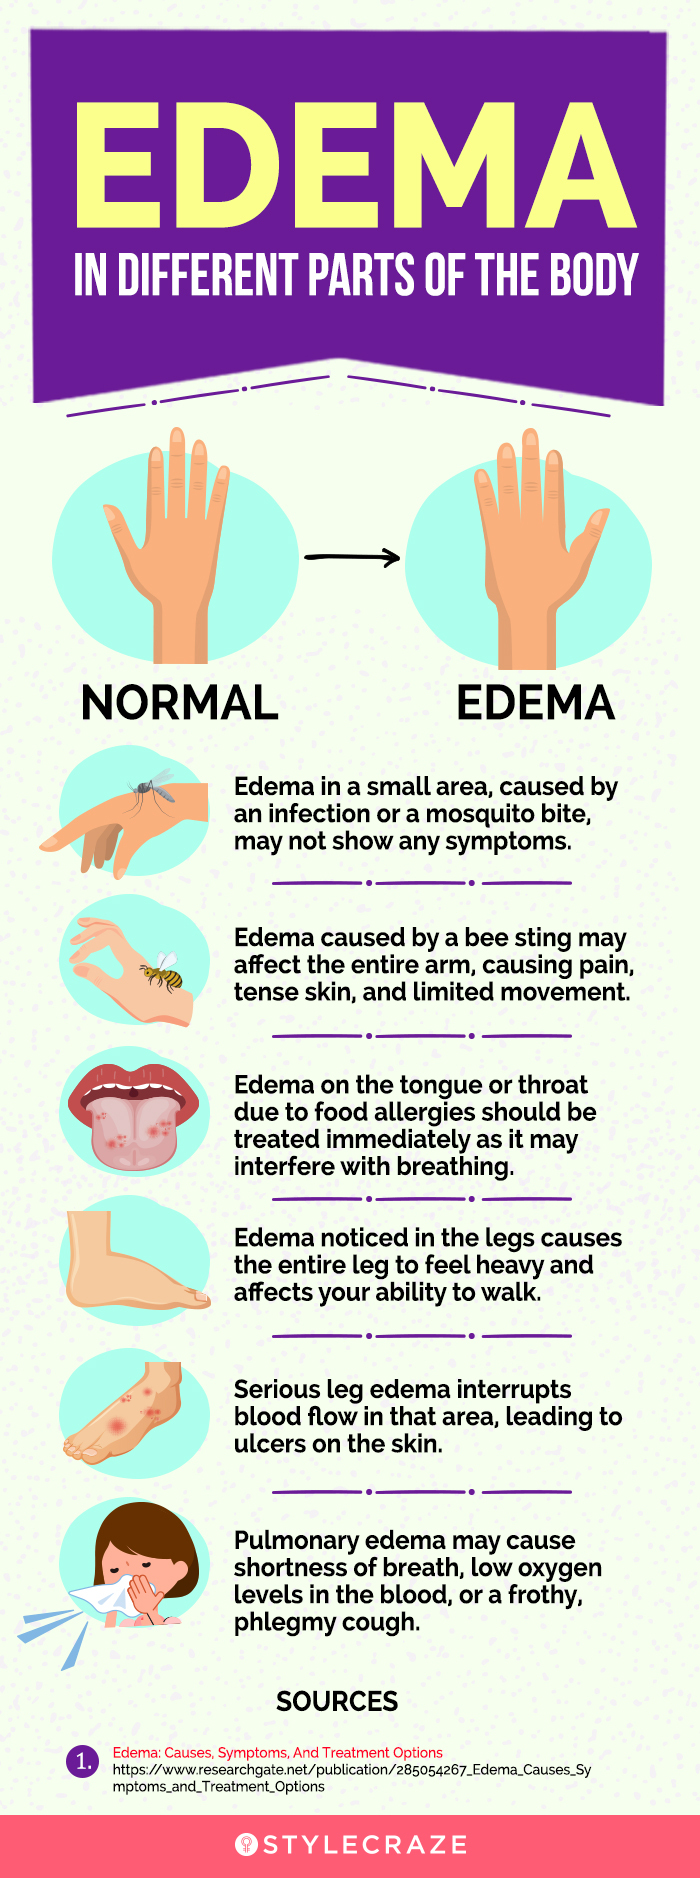 edema in different parts of the body [infographic]